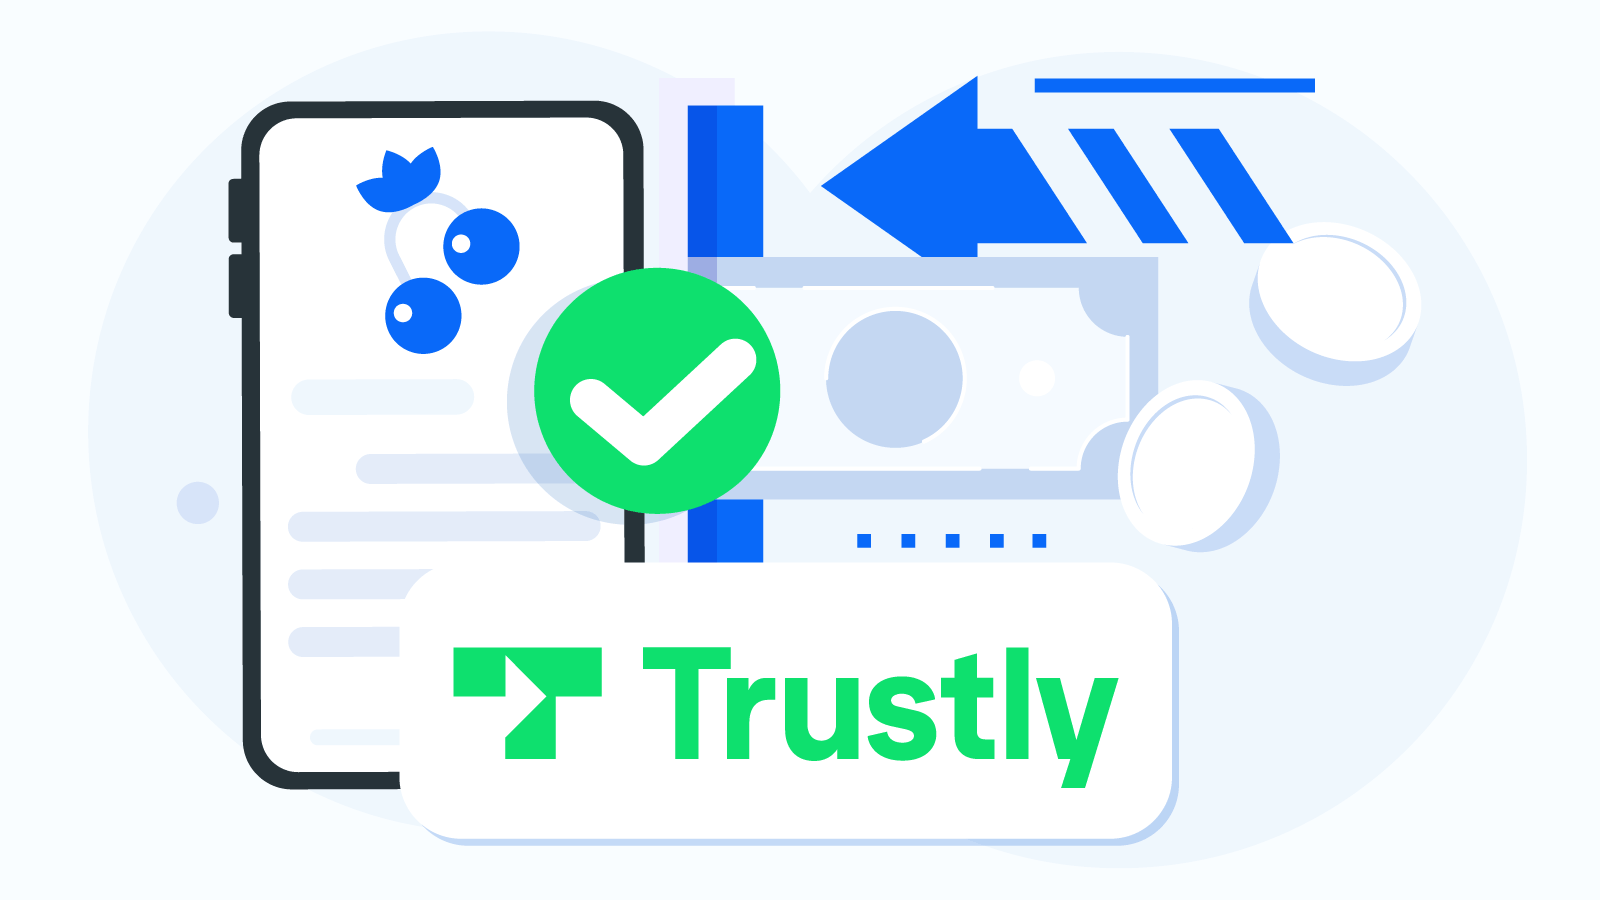 How To Make A Deposit Using Trustly Like a Pro2